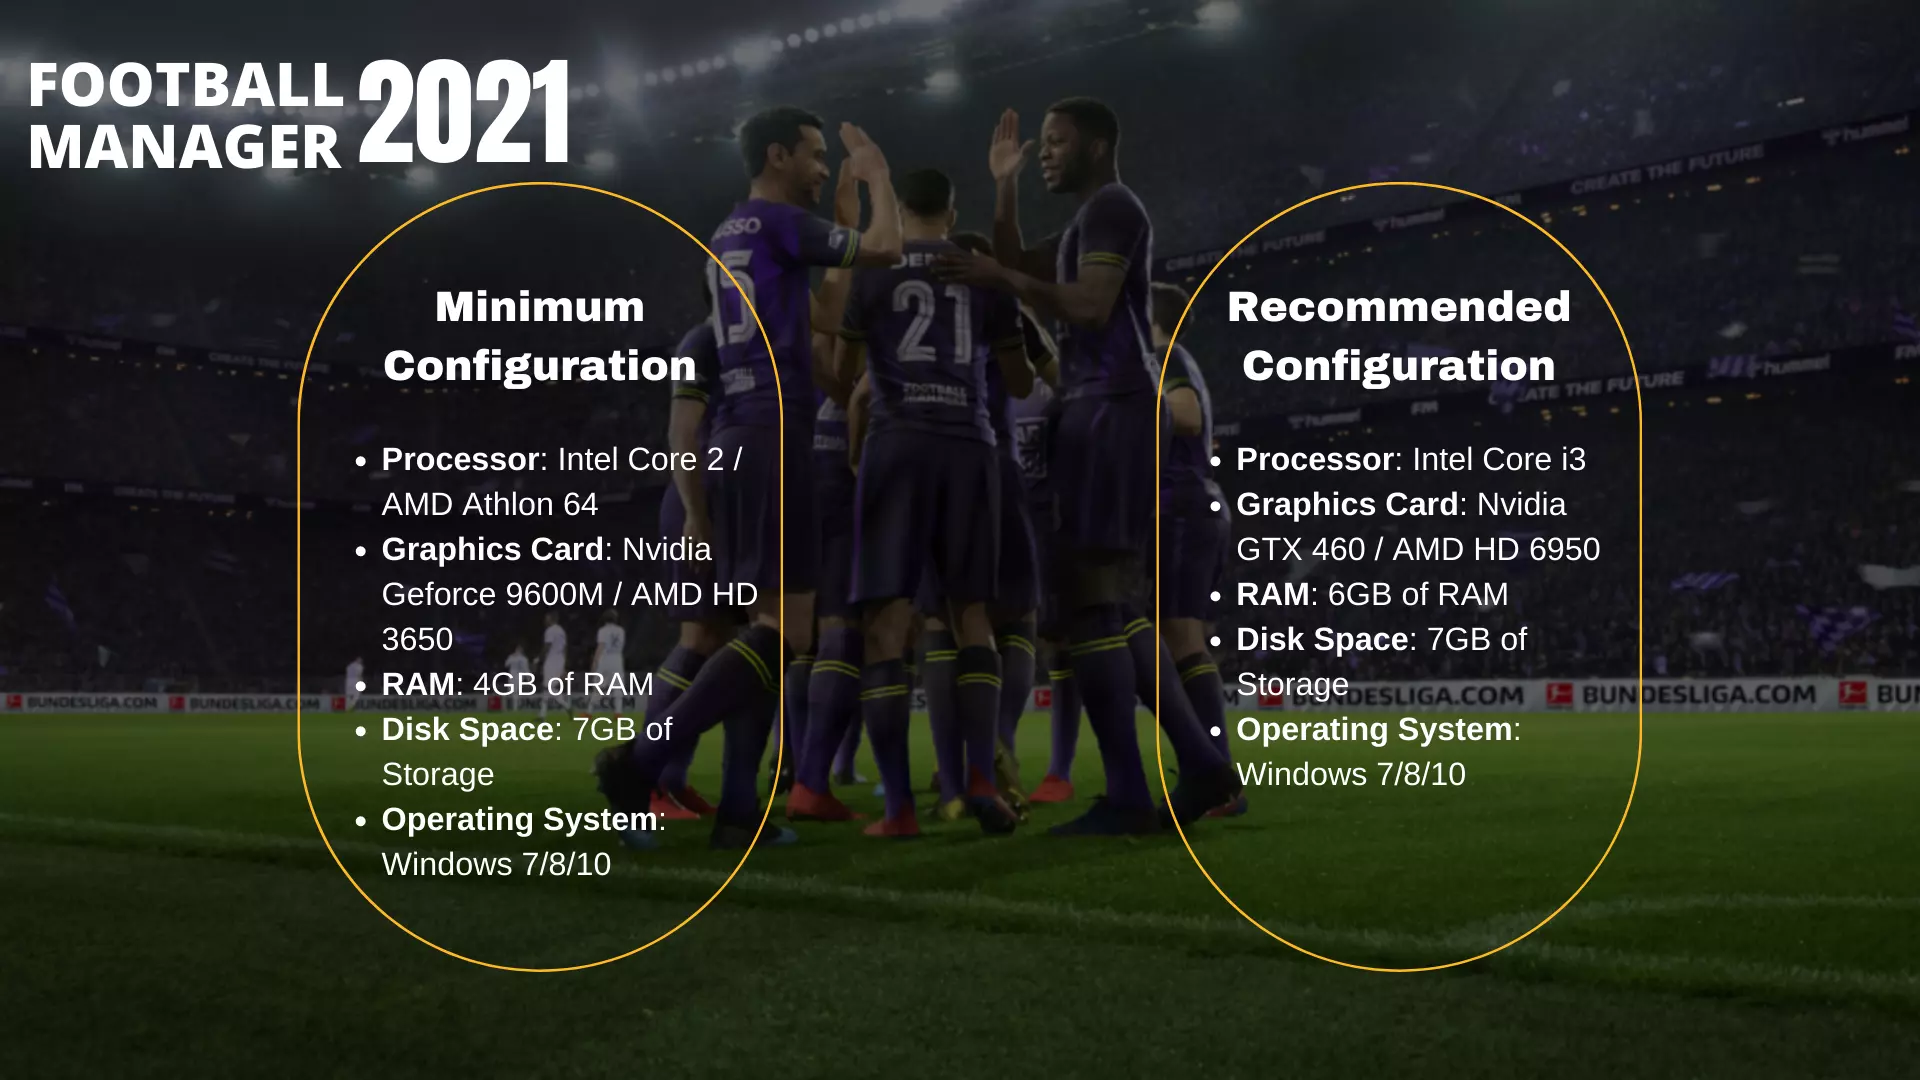 Requirements for Football Manager 2021